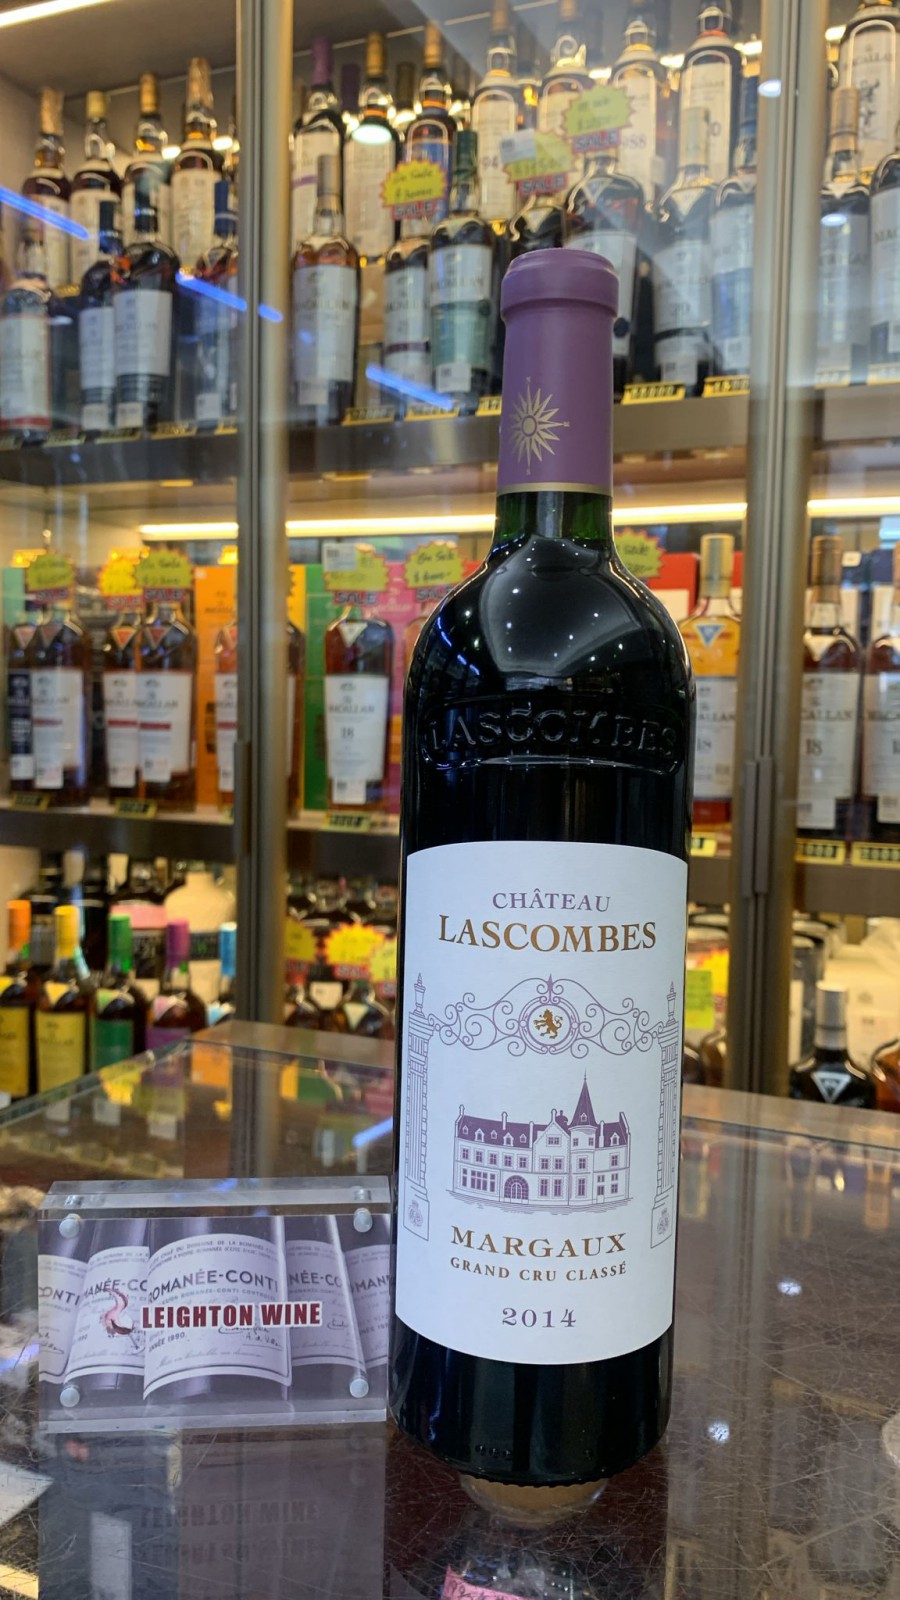 Chateau Lascombes Margaux 2014